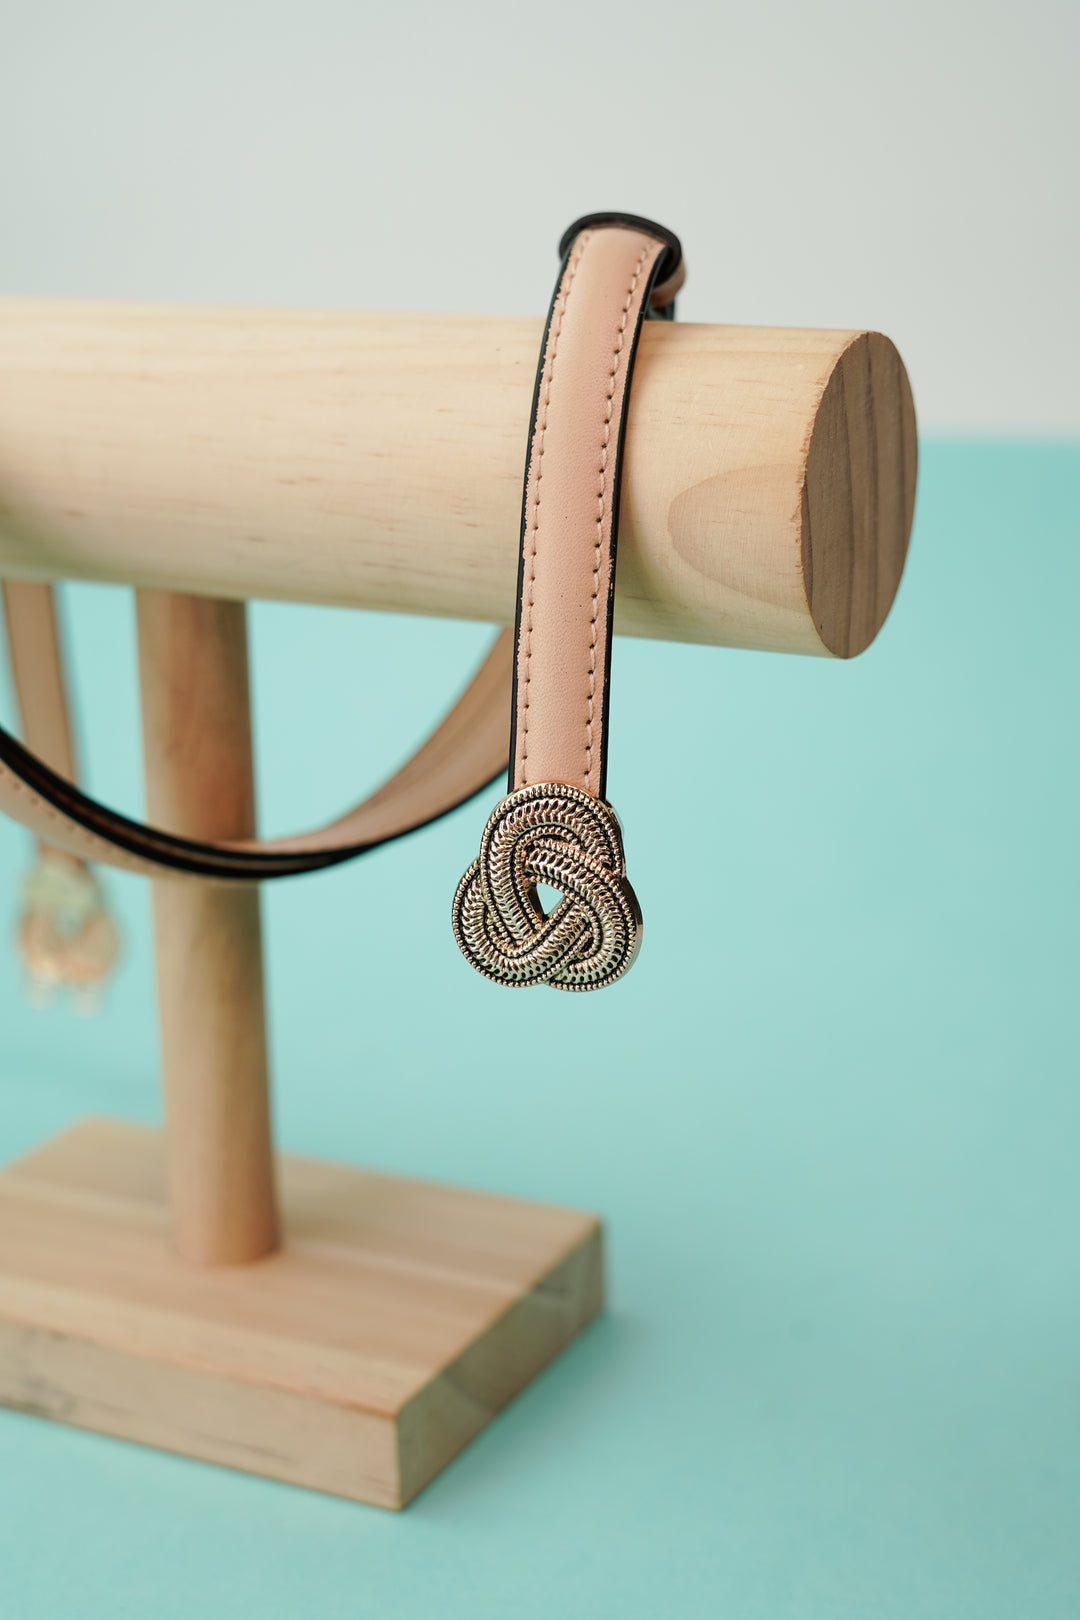 Detailed View of the Long Line Knot Buckle Accessory